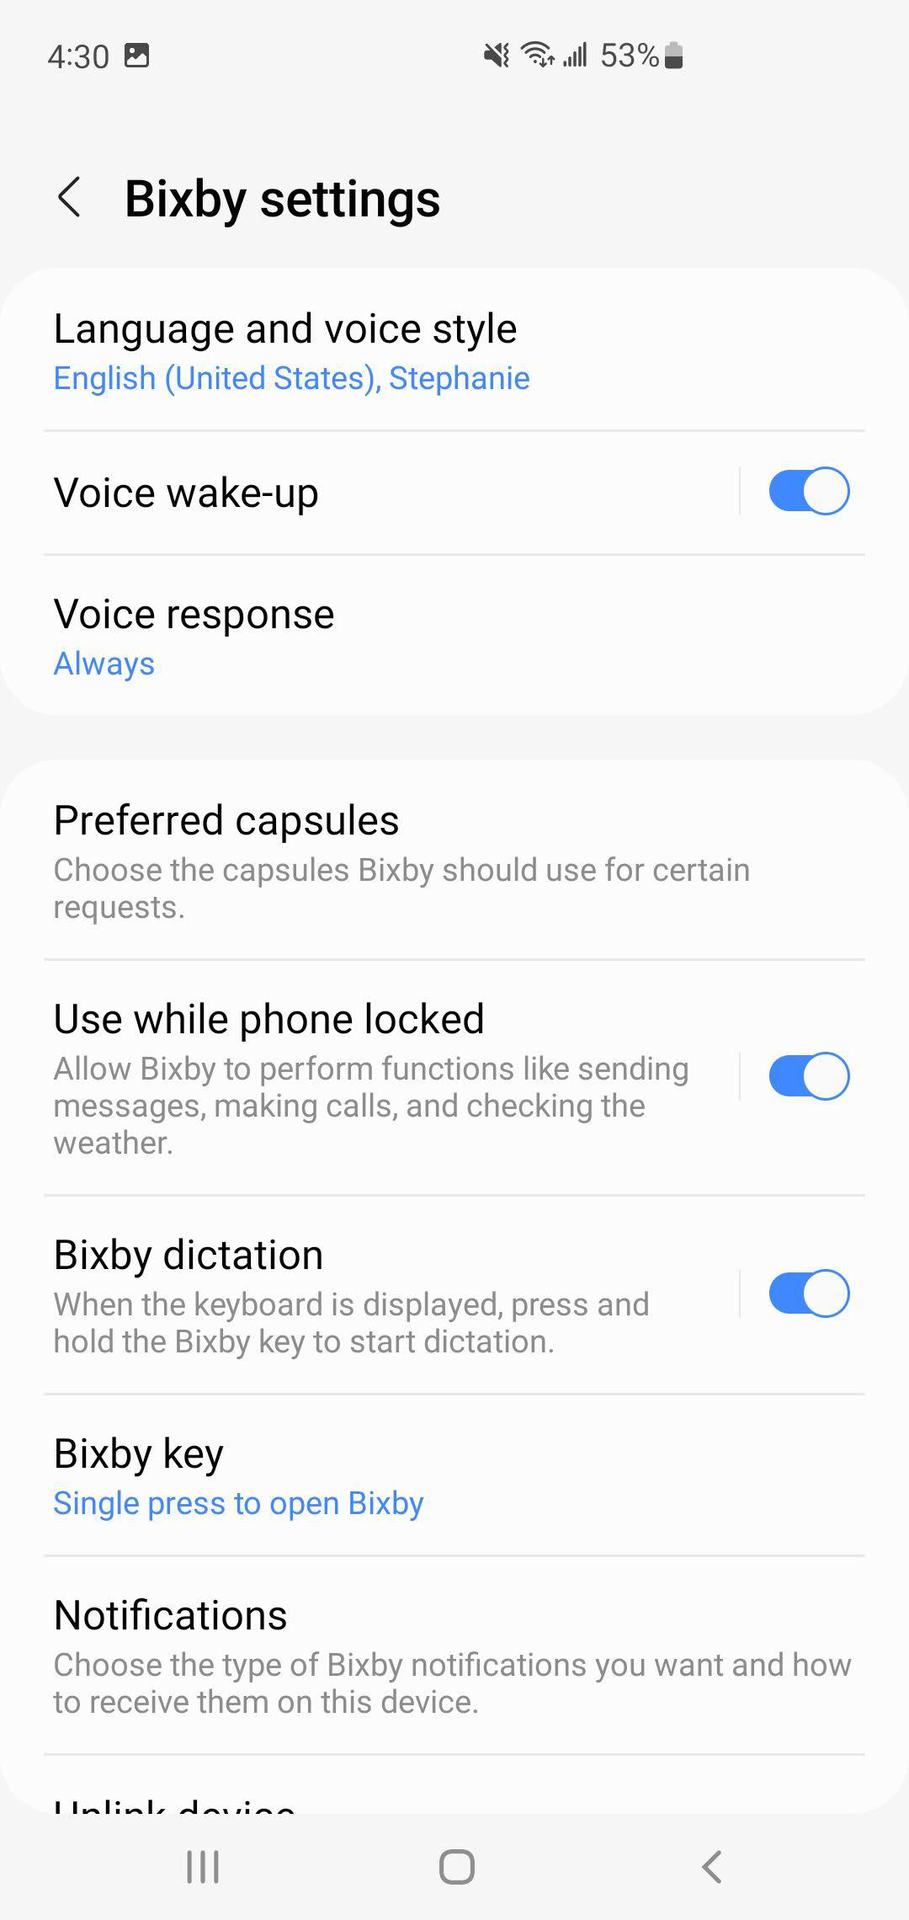 How to activate Bixby Voice wake up 2